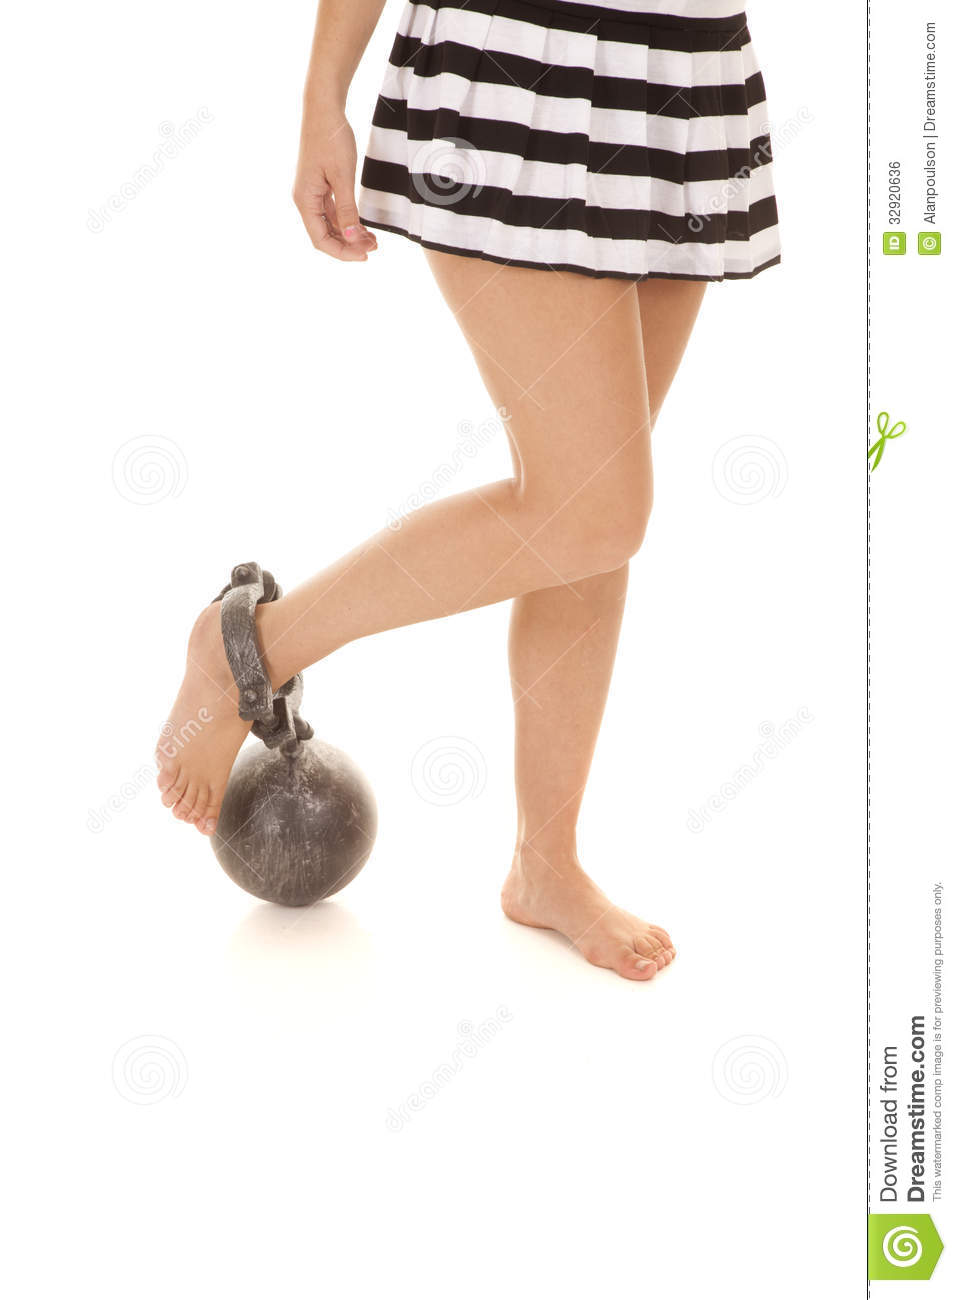 Woman Jail Legs Chain Royalty Free Stock Image   Image  32920636